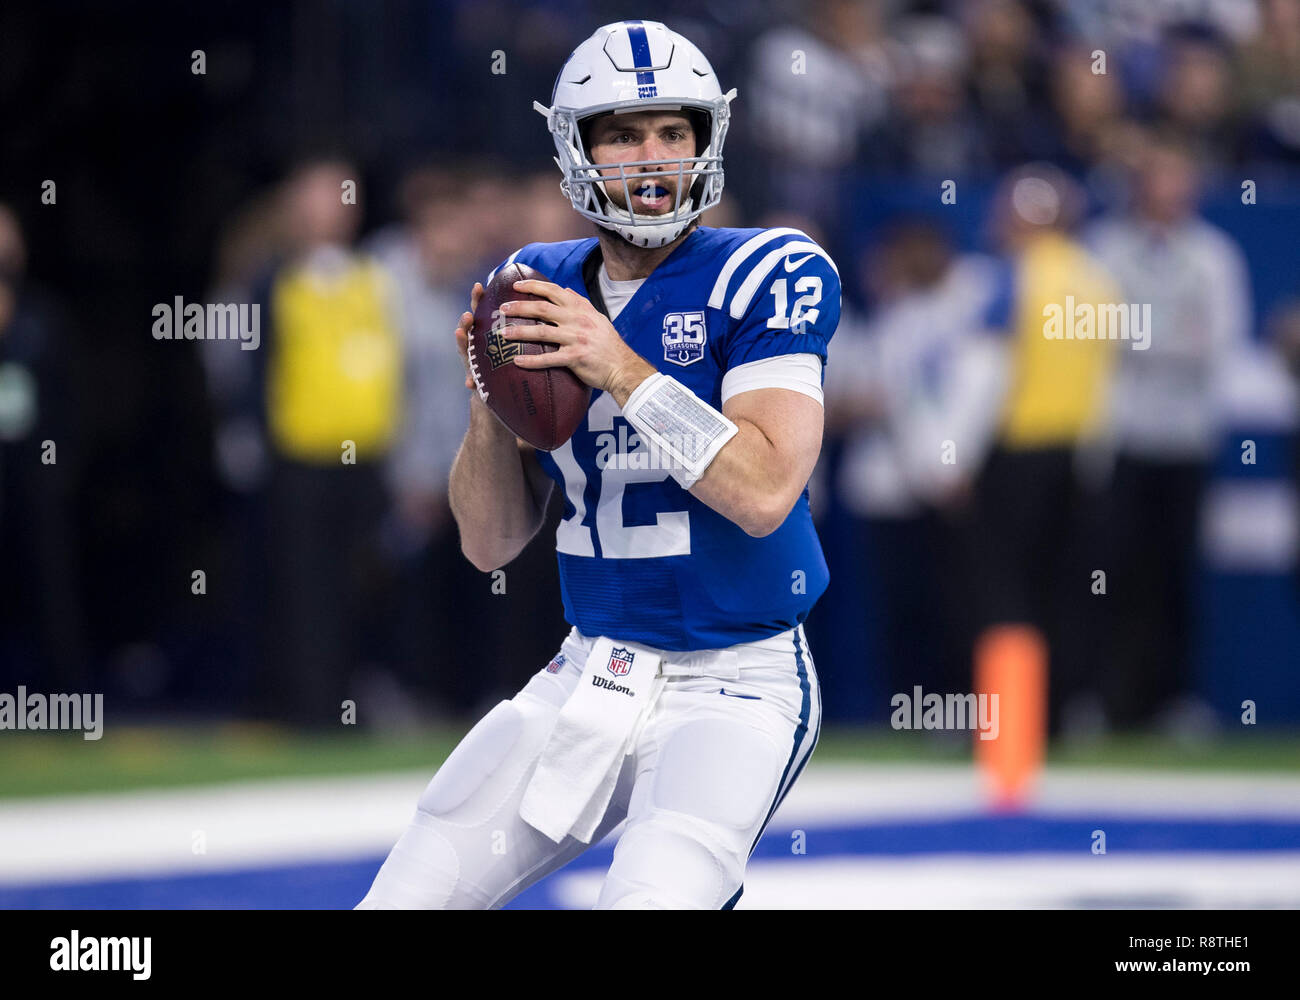 Indianapolis, Indiana, USA. 16th Dec, 2018. Indianapolis Colts quarterback Andrew Luck (12) passes the ball during NFL football game action between the Dallas Cowboys and the Indianapolis Colts at Lucas Oil Stadium in Indianapolis, Indiana. Indianapolis defeated Dallas 23-0. John Mersits/CSM/Alamy Live News Stock Photo